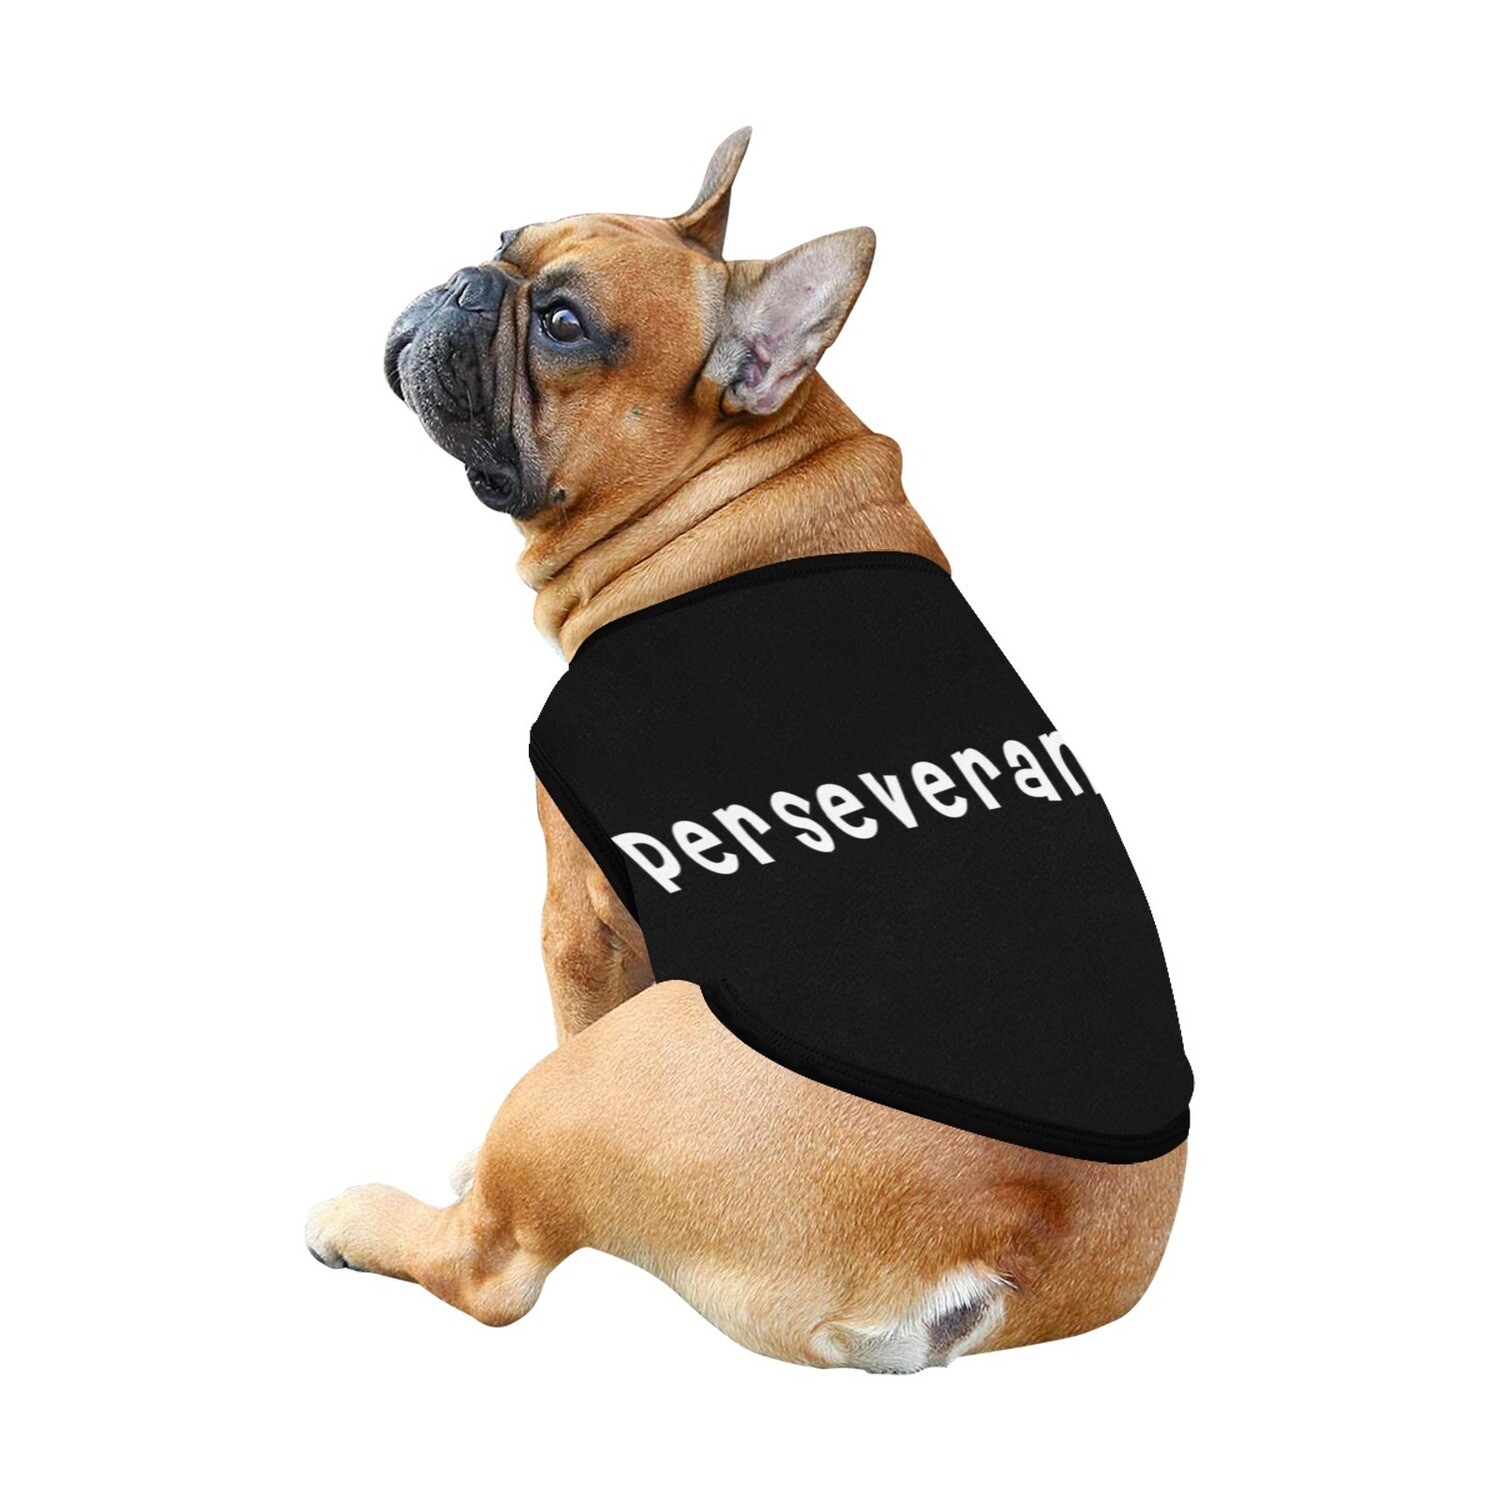 🐕 🚀 Perseverance Dog Tank Top, Dog shirt, Dog clothes, Dog t-shirt, Gift, 7 sizes XS to 3XL, red planet, space, exploration, mars, nasa, rover, black and white